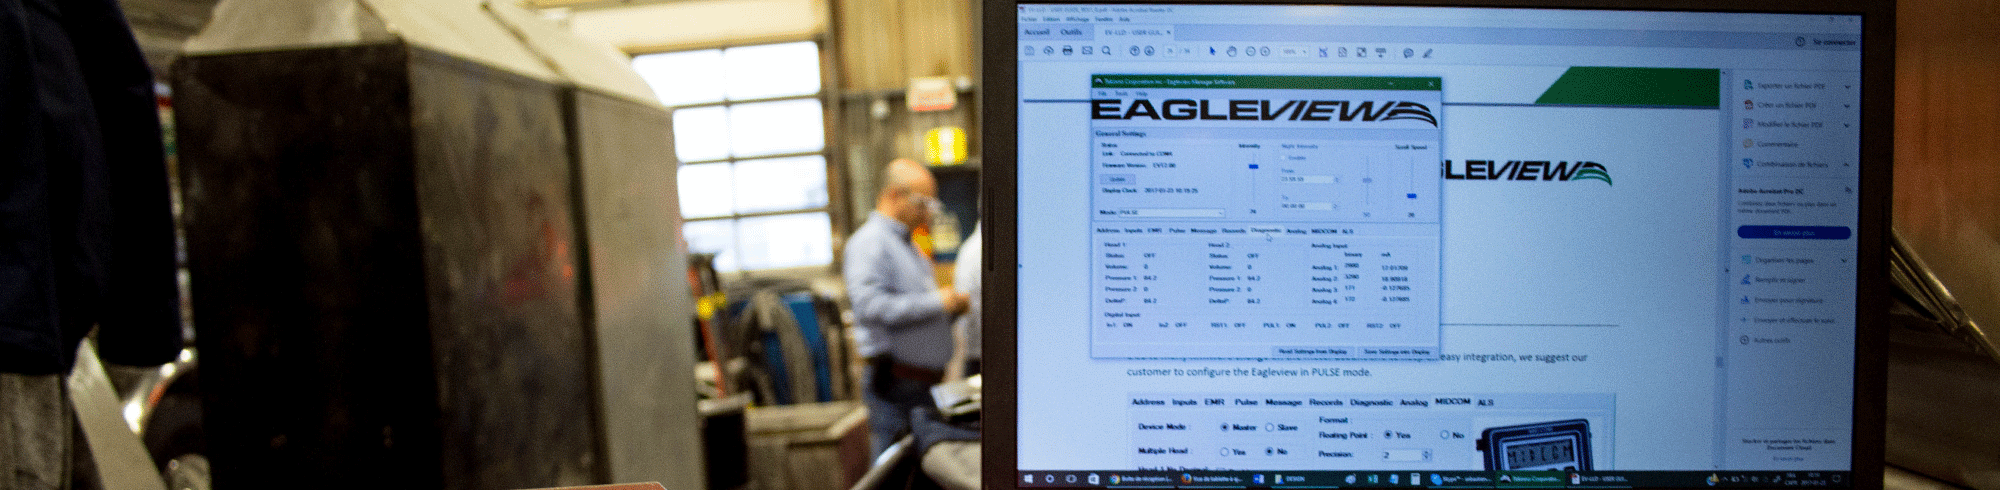 eagleview manager configuration software